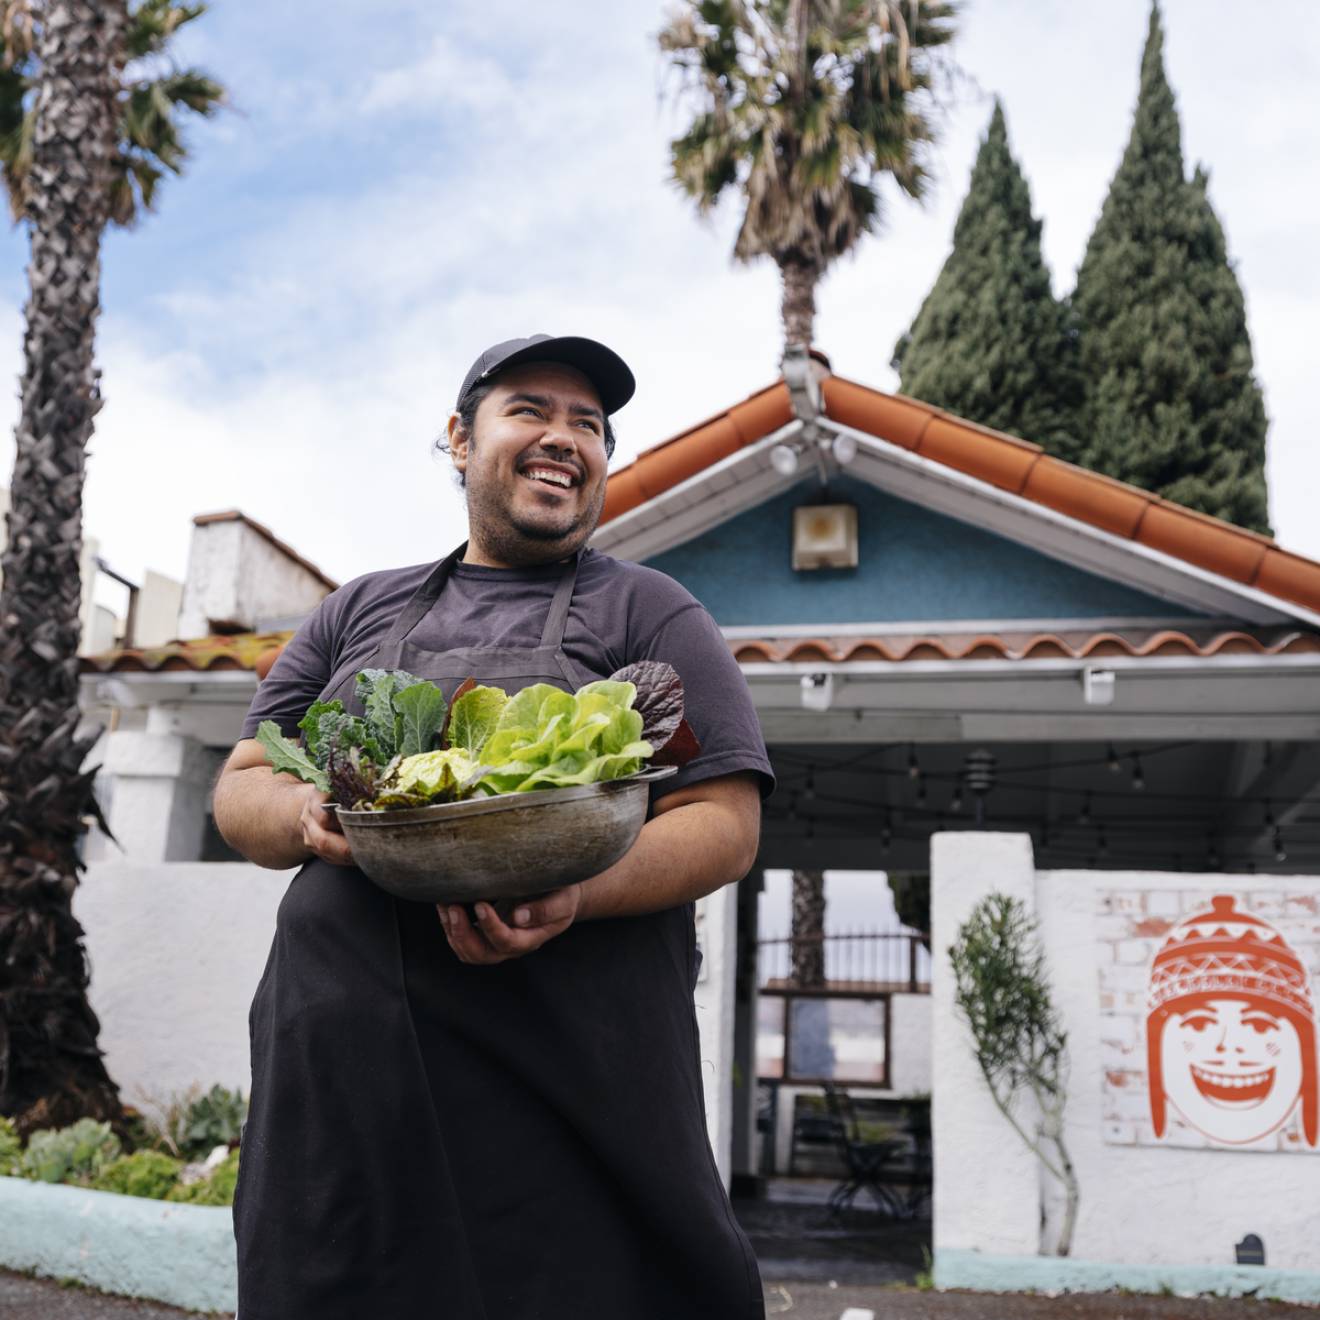 A young man smiles looking up and away from the camera, holding an armful of recently harvested lettuces. He's standing in front of a low green building with palm trees in the background. It looks like LA. 